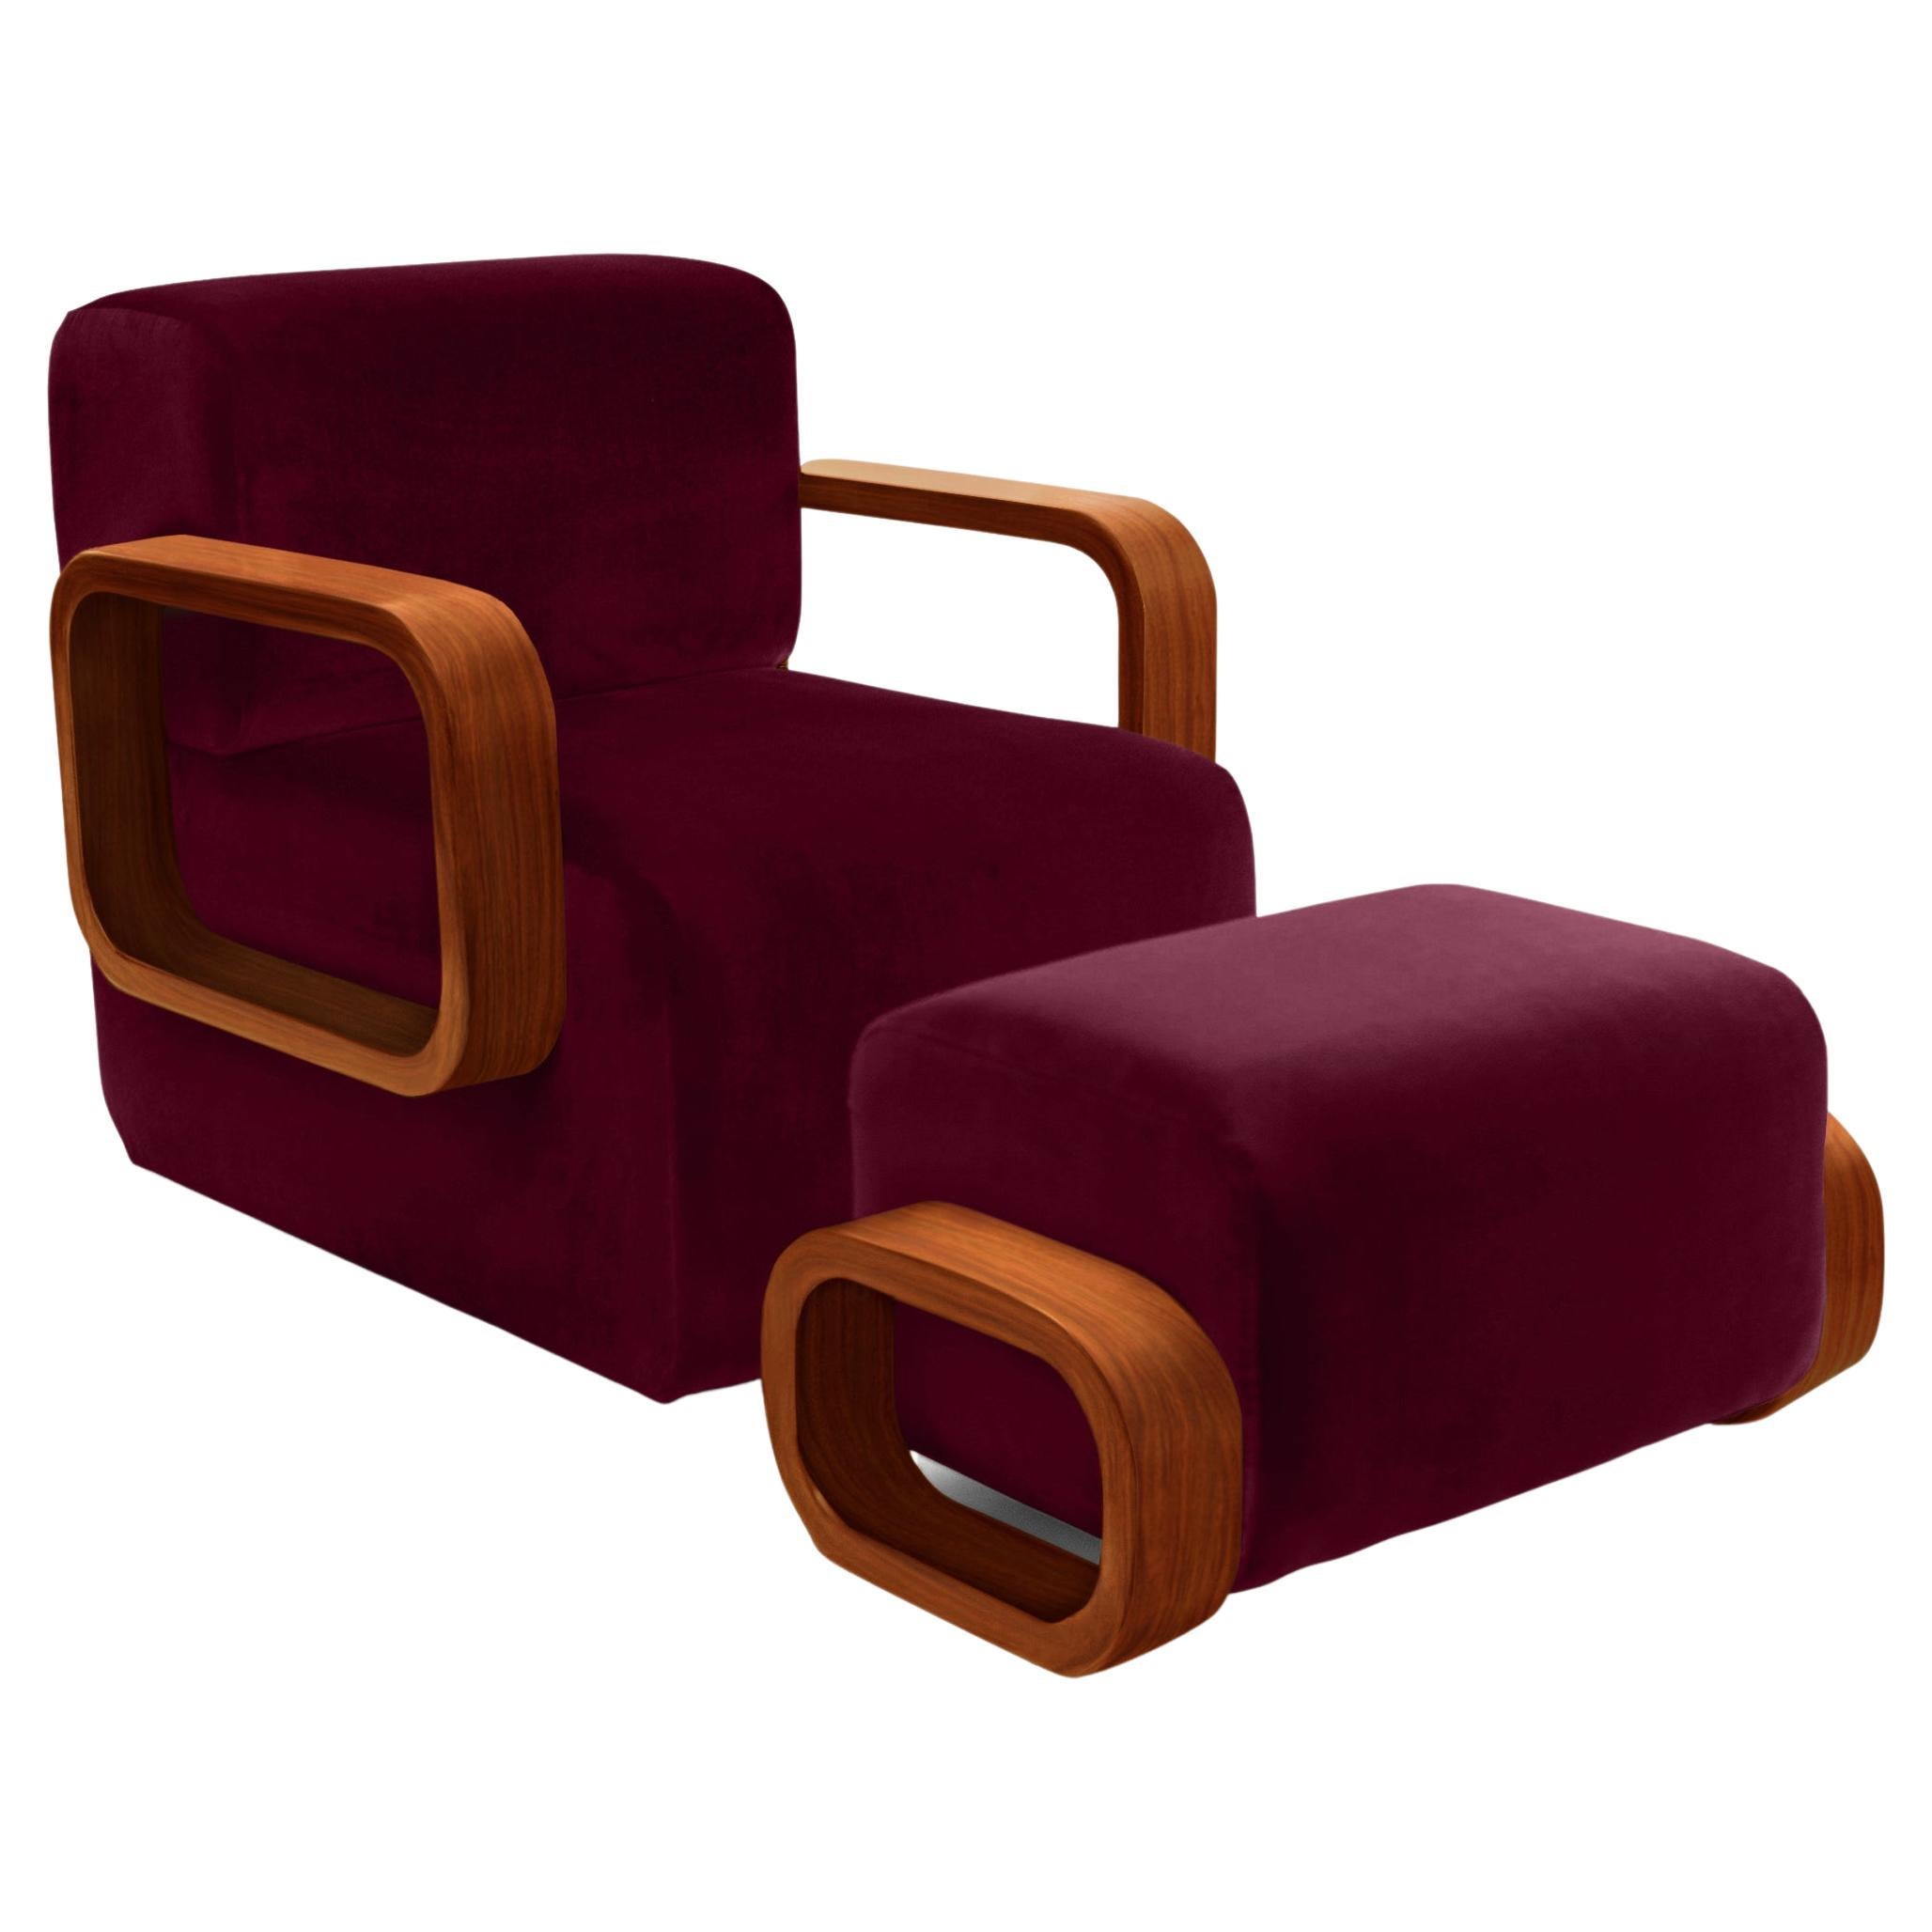 Cayenne Lounge Chair, Cranberry Velvet/High Gloss Varnish Brown Solid Oak For Sale